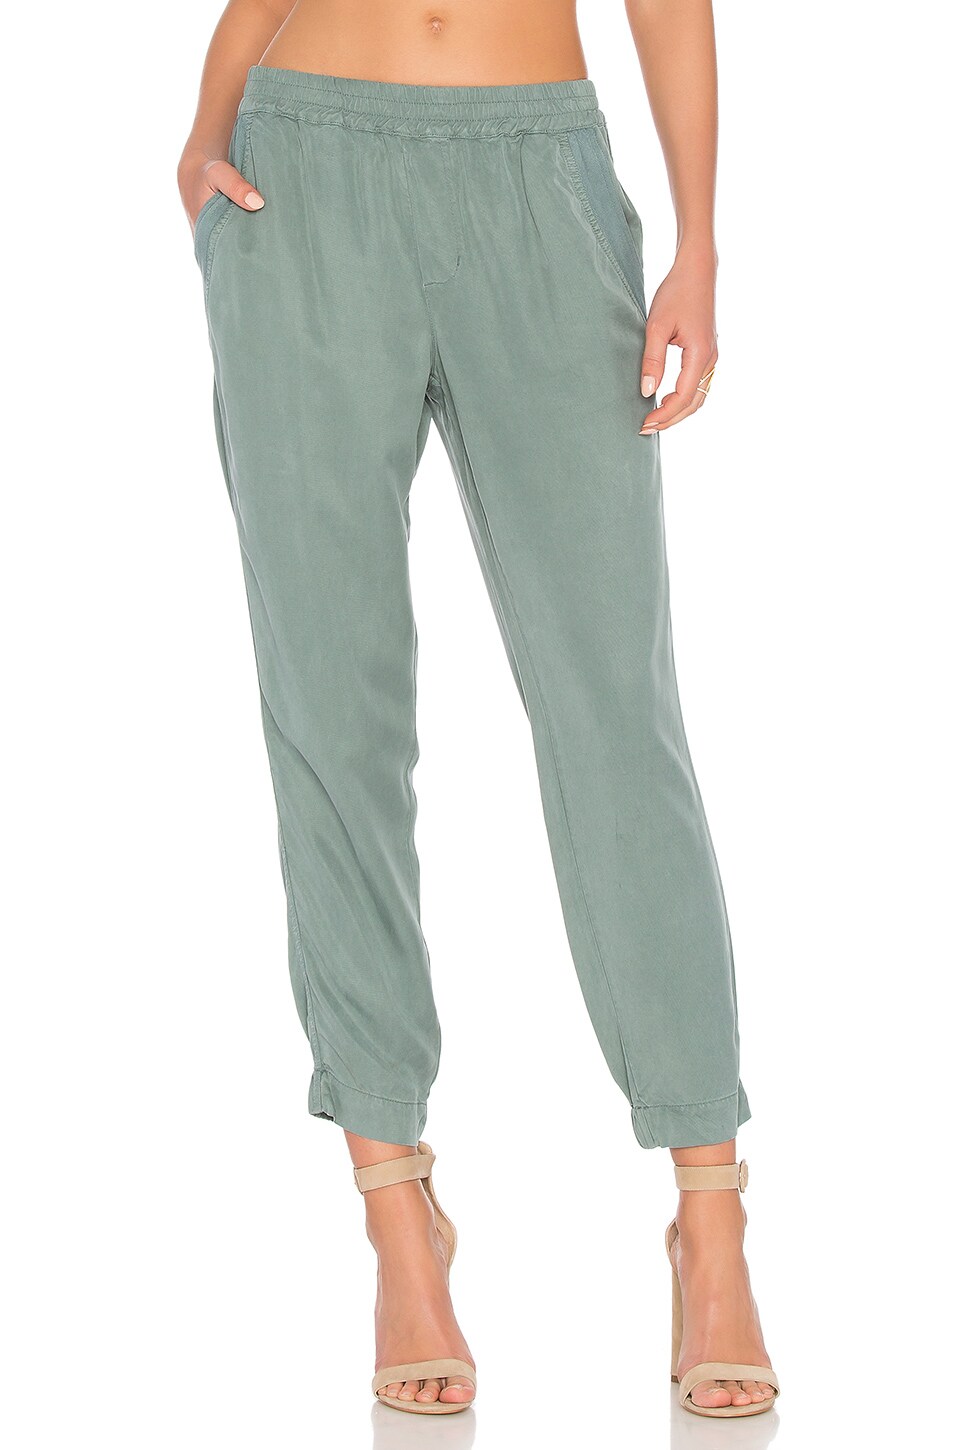 YFB CLOTHING Larry Jogger in Vintage Teal | REVOLVE